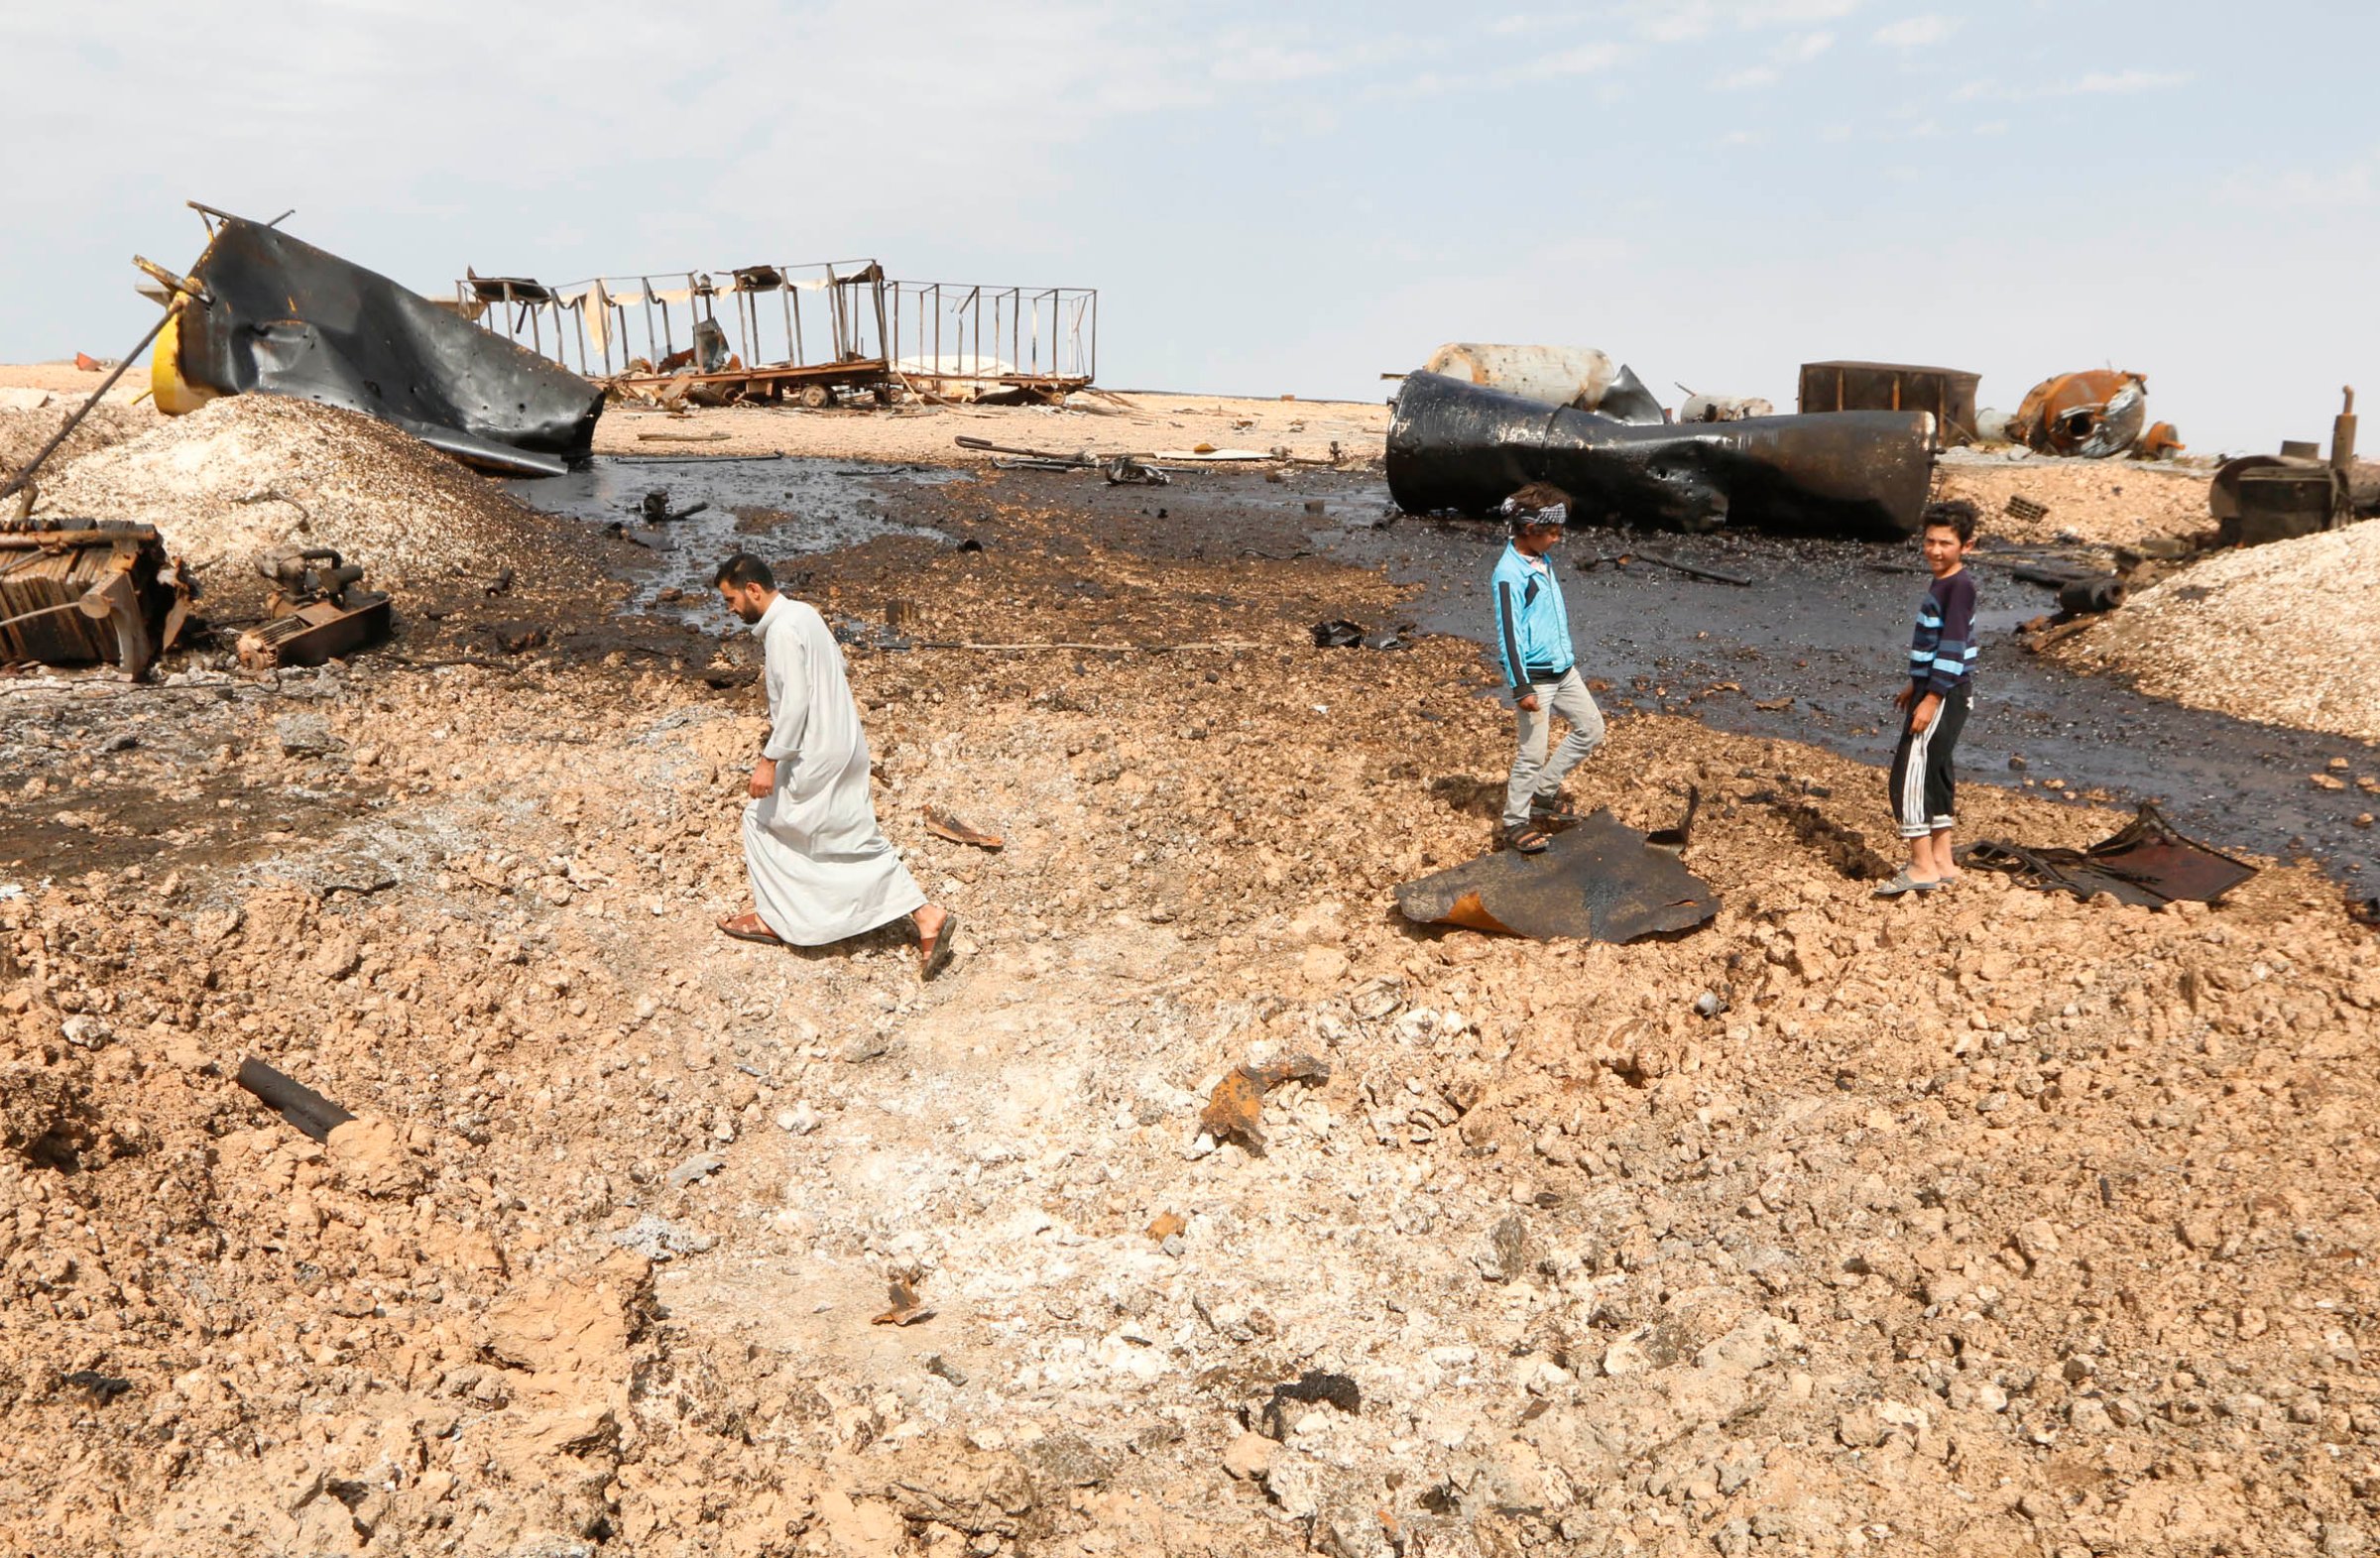 People inspect damage at an oil refinery that was targeted by what activists said were U.S.-led air strikes at al-Khaboura village, near the Syrian town of Tel Abyad of Raqqa governate